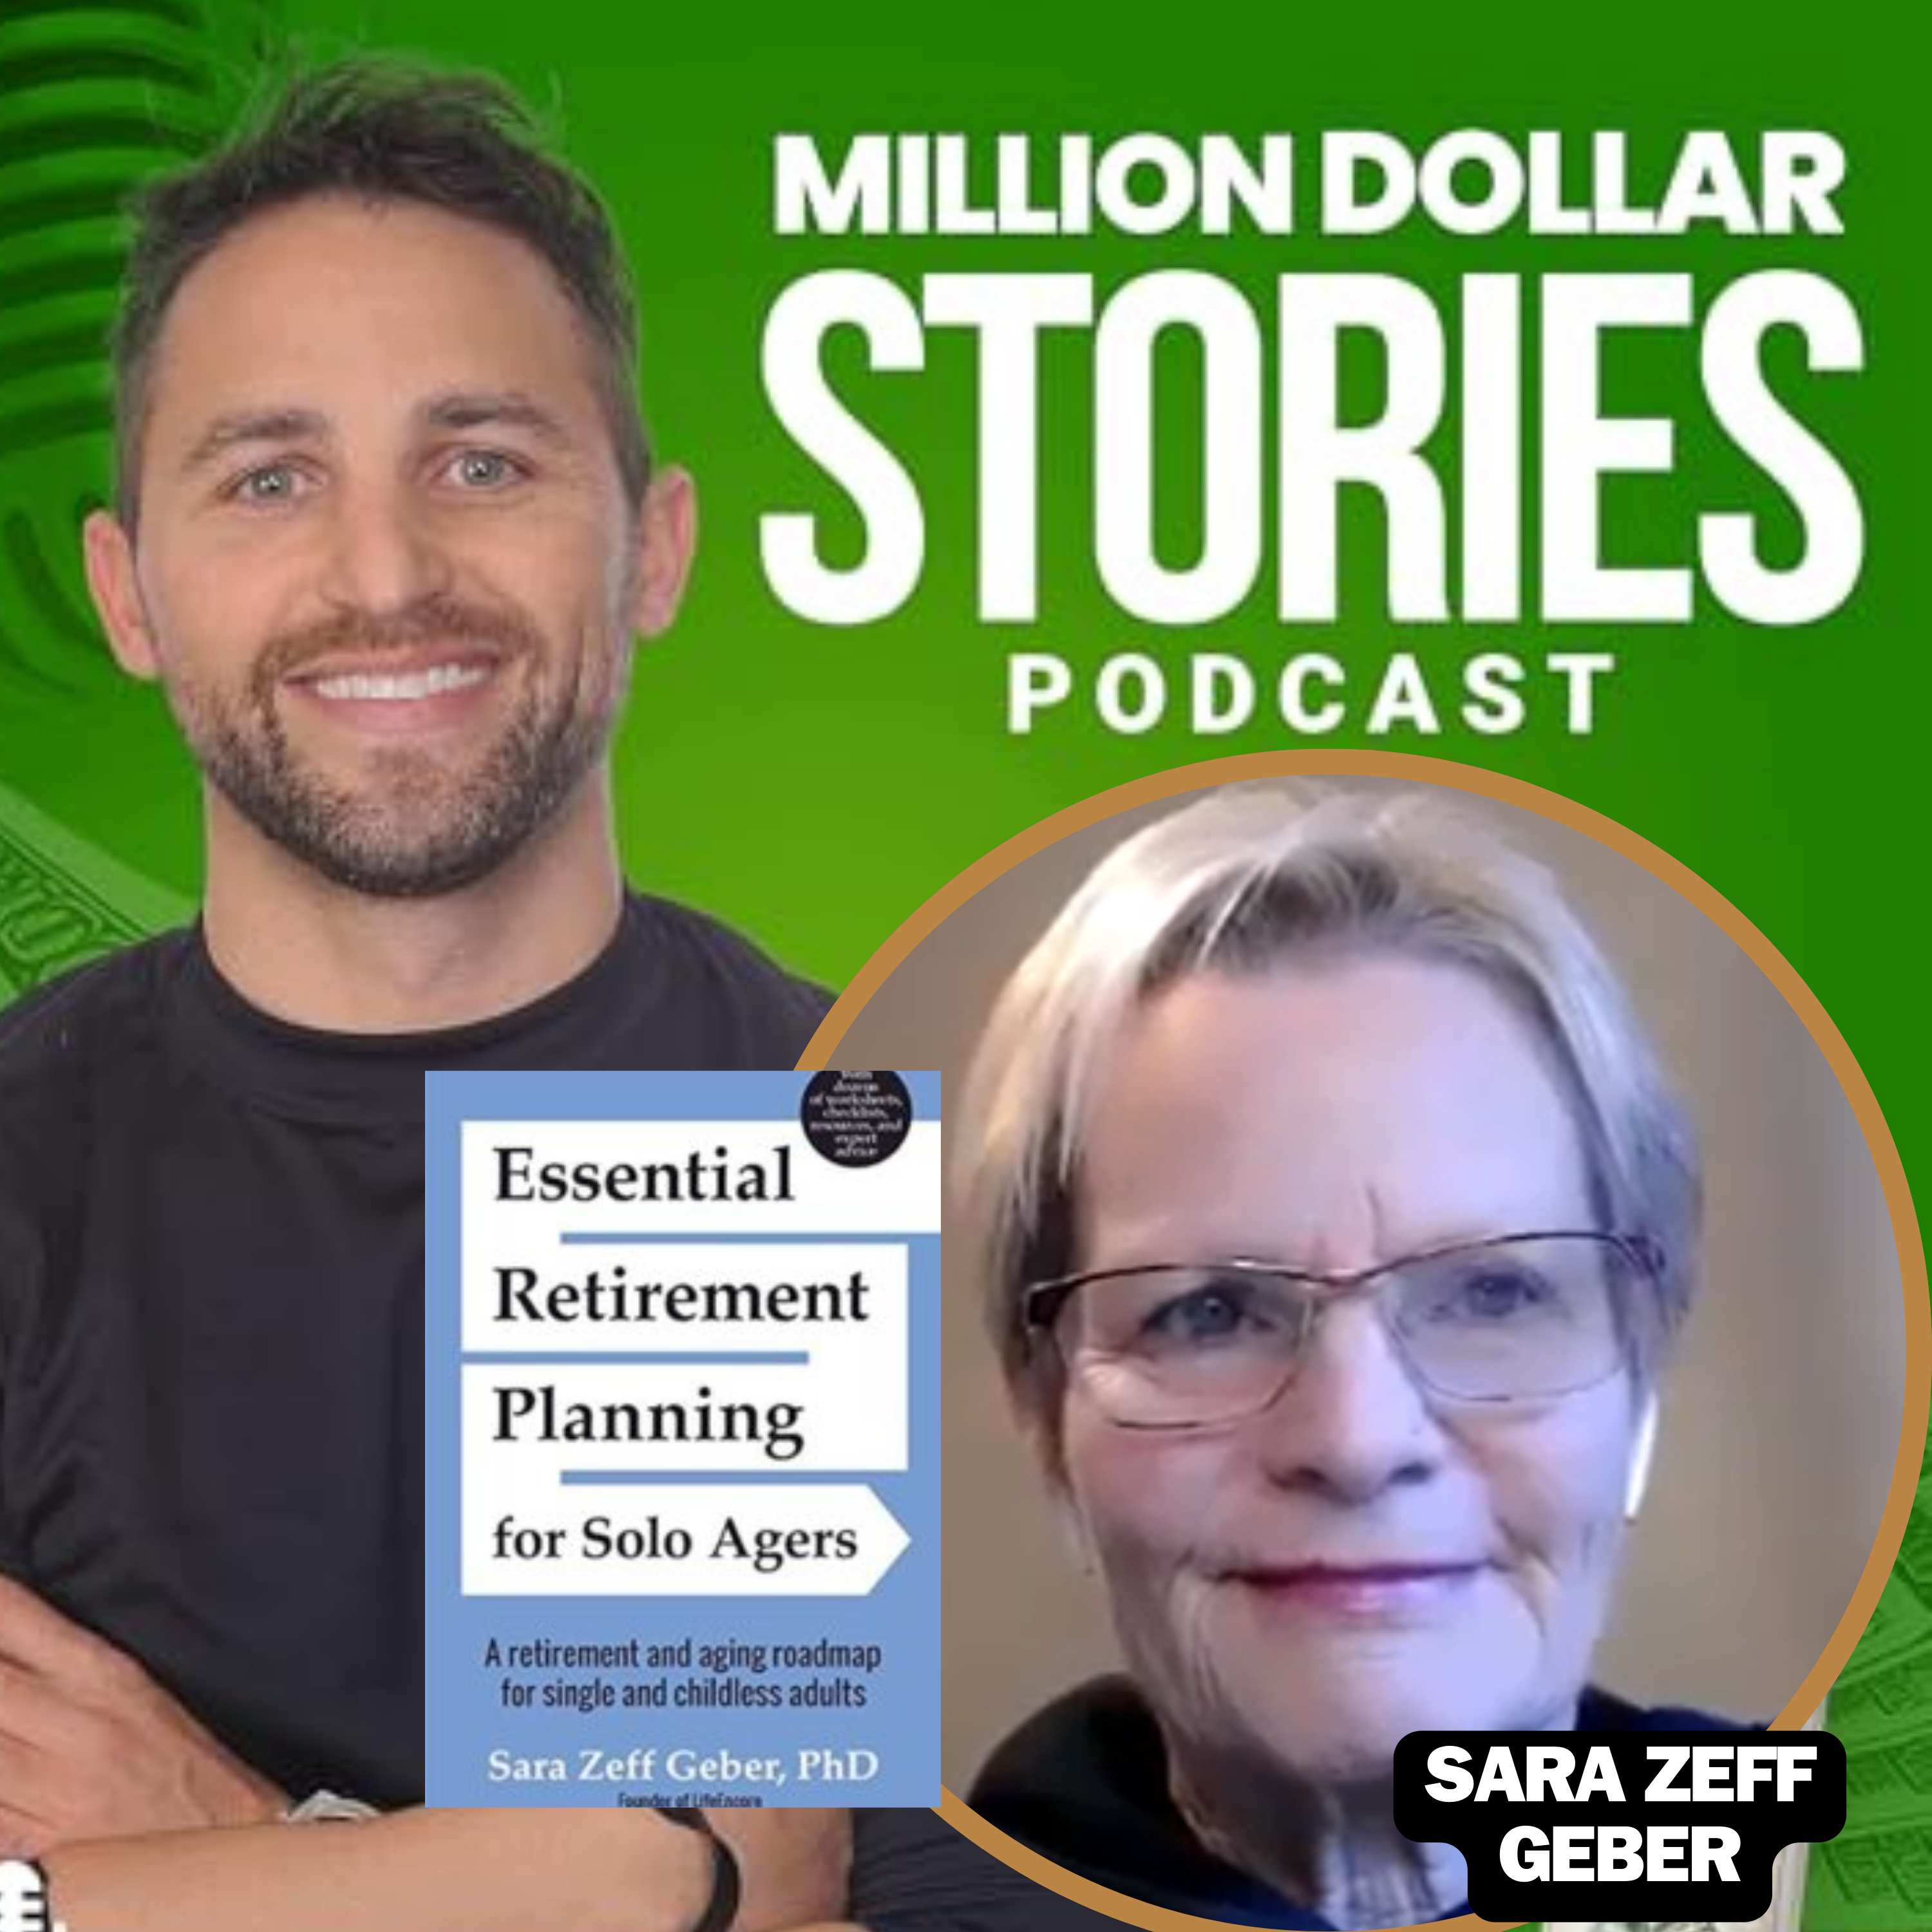 Sara Zeff Geber – Author of “Essential Retirement Planning for Solo Agers”